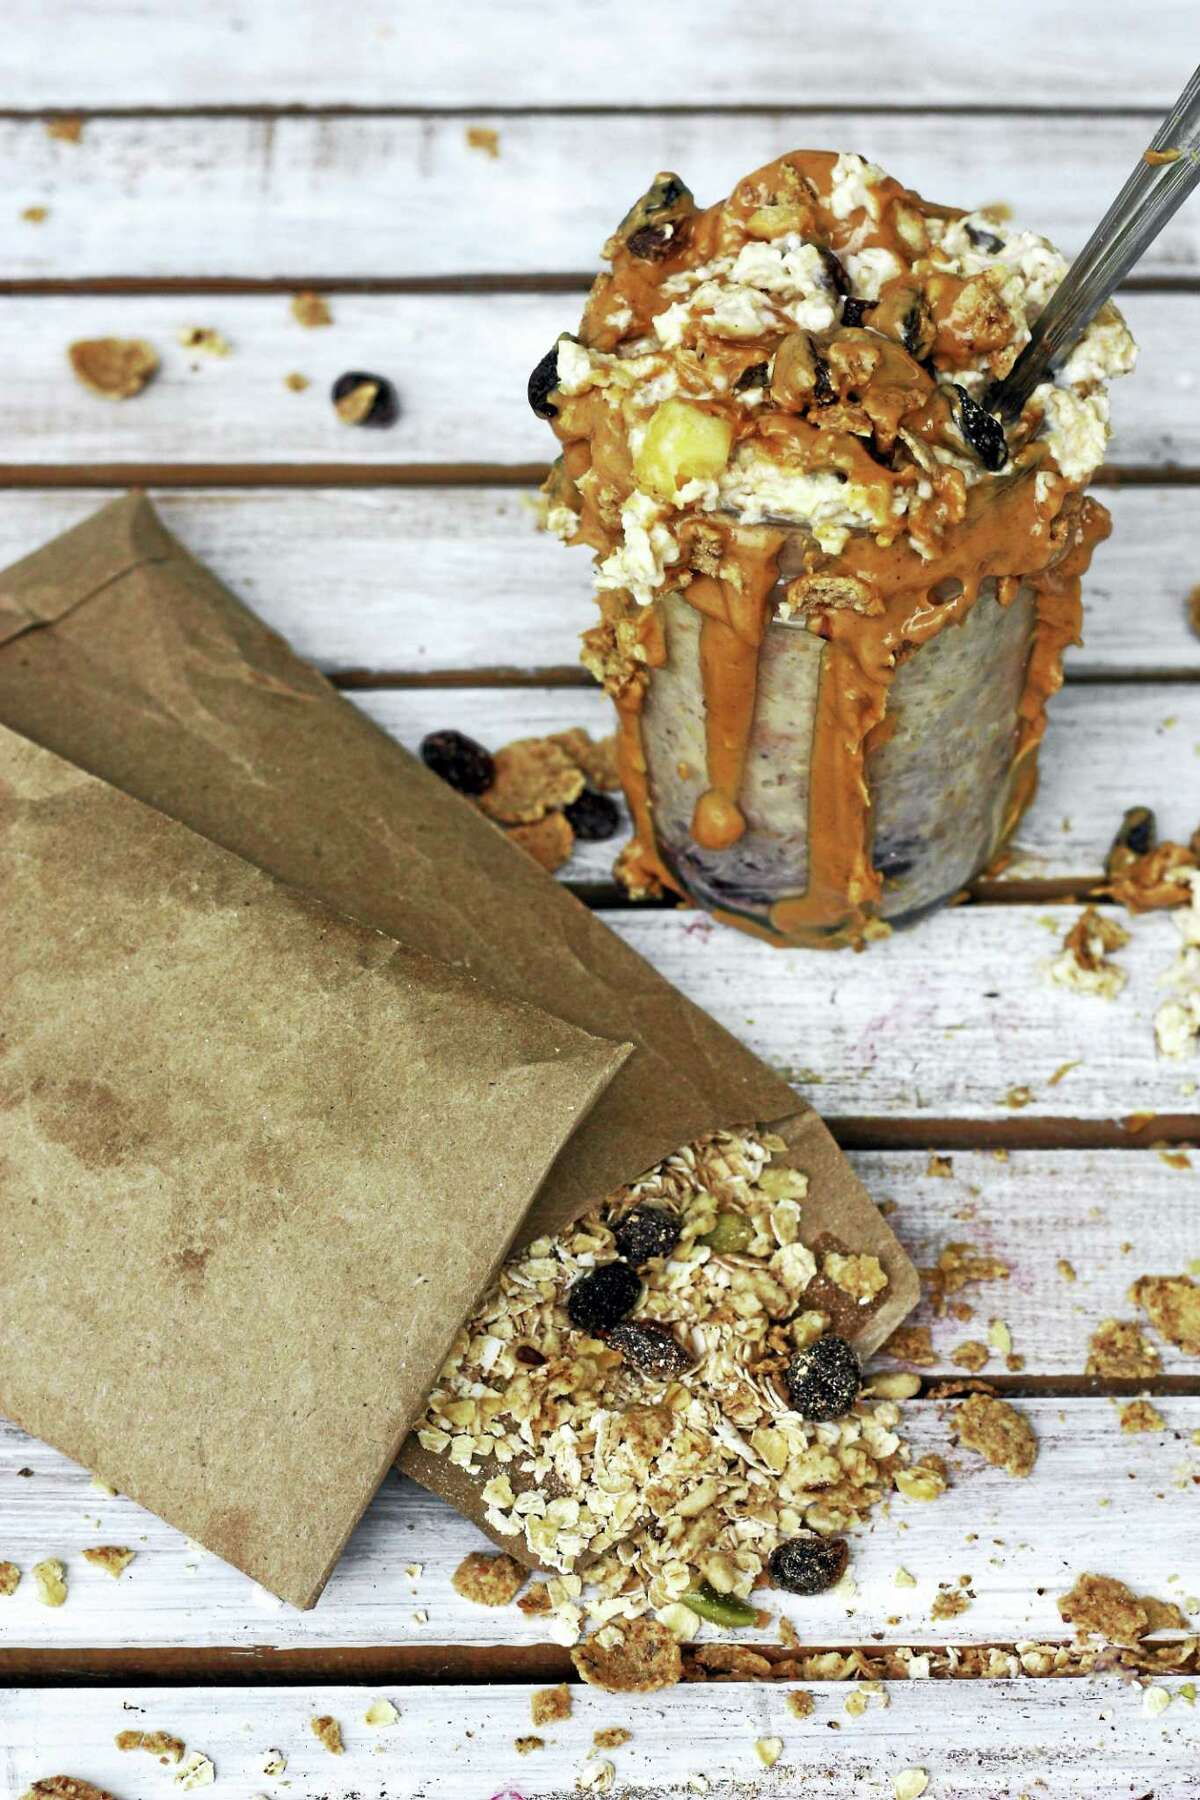 Peanut butter chocolate chip overnight oats cross the line between energy food and total indulgence — and they’re for breakfast.